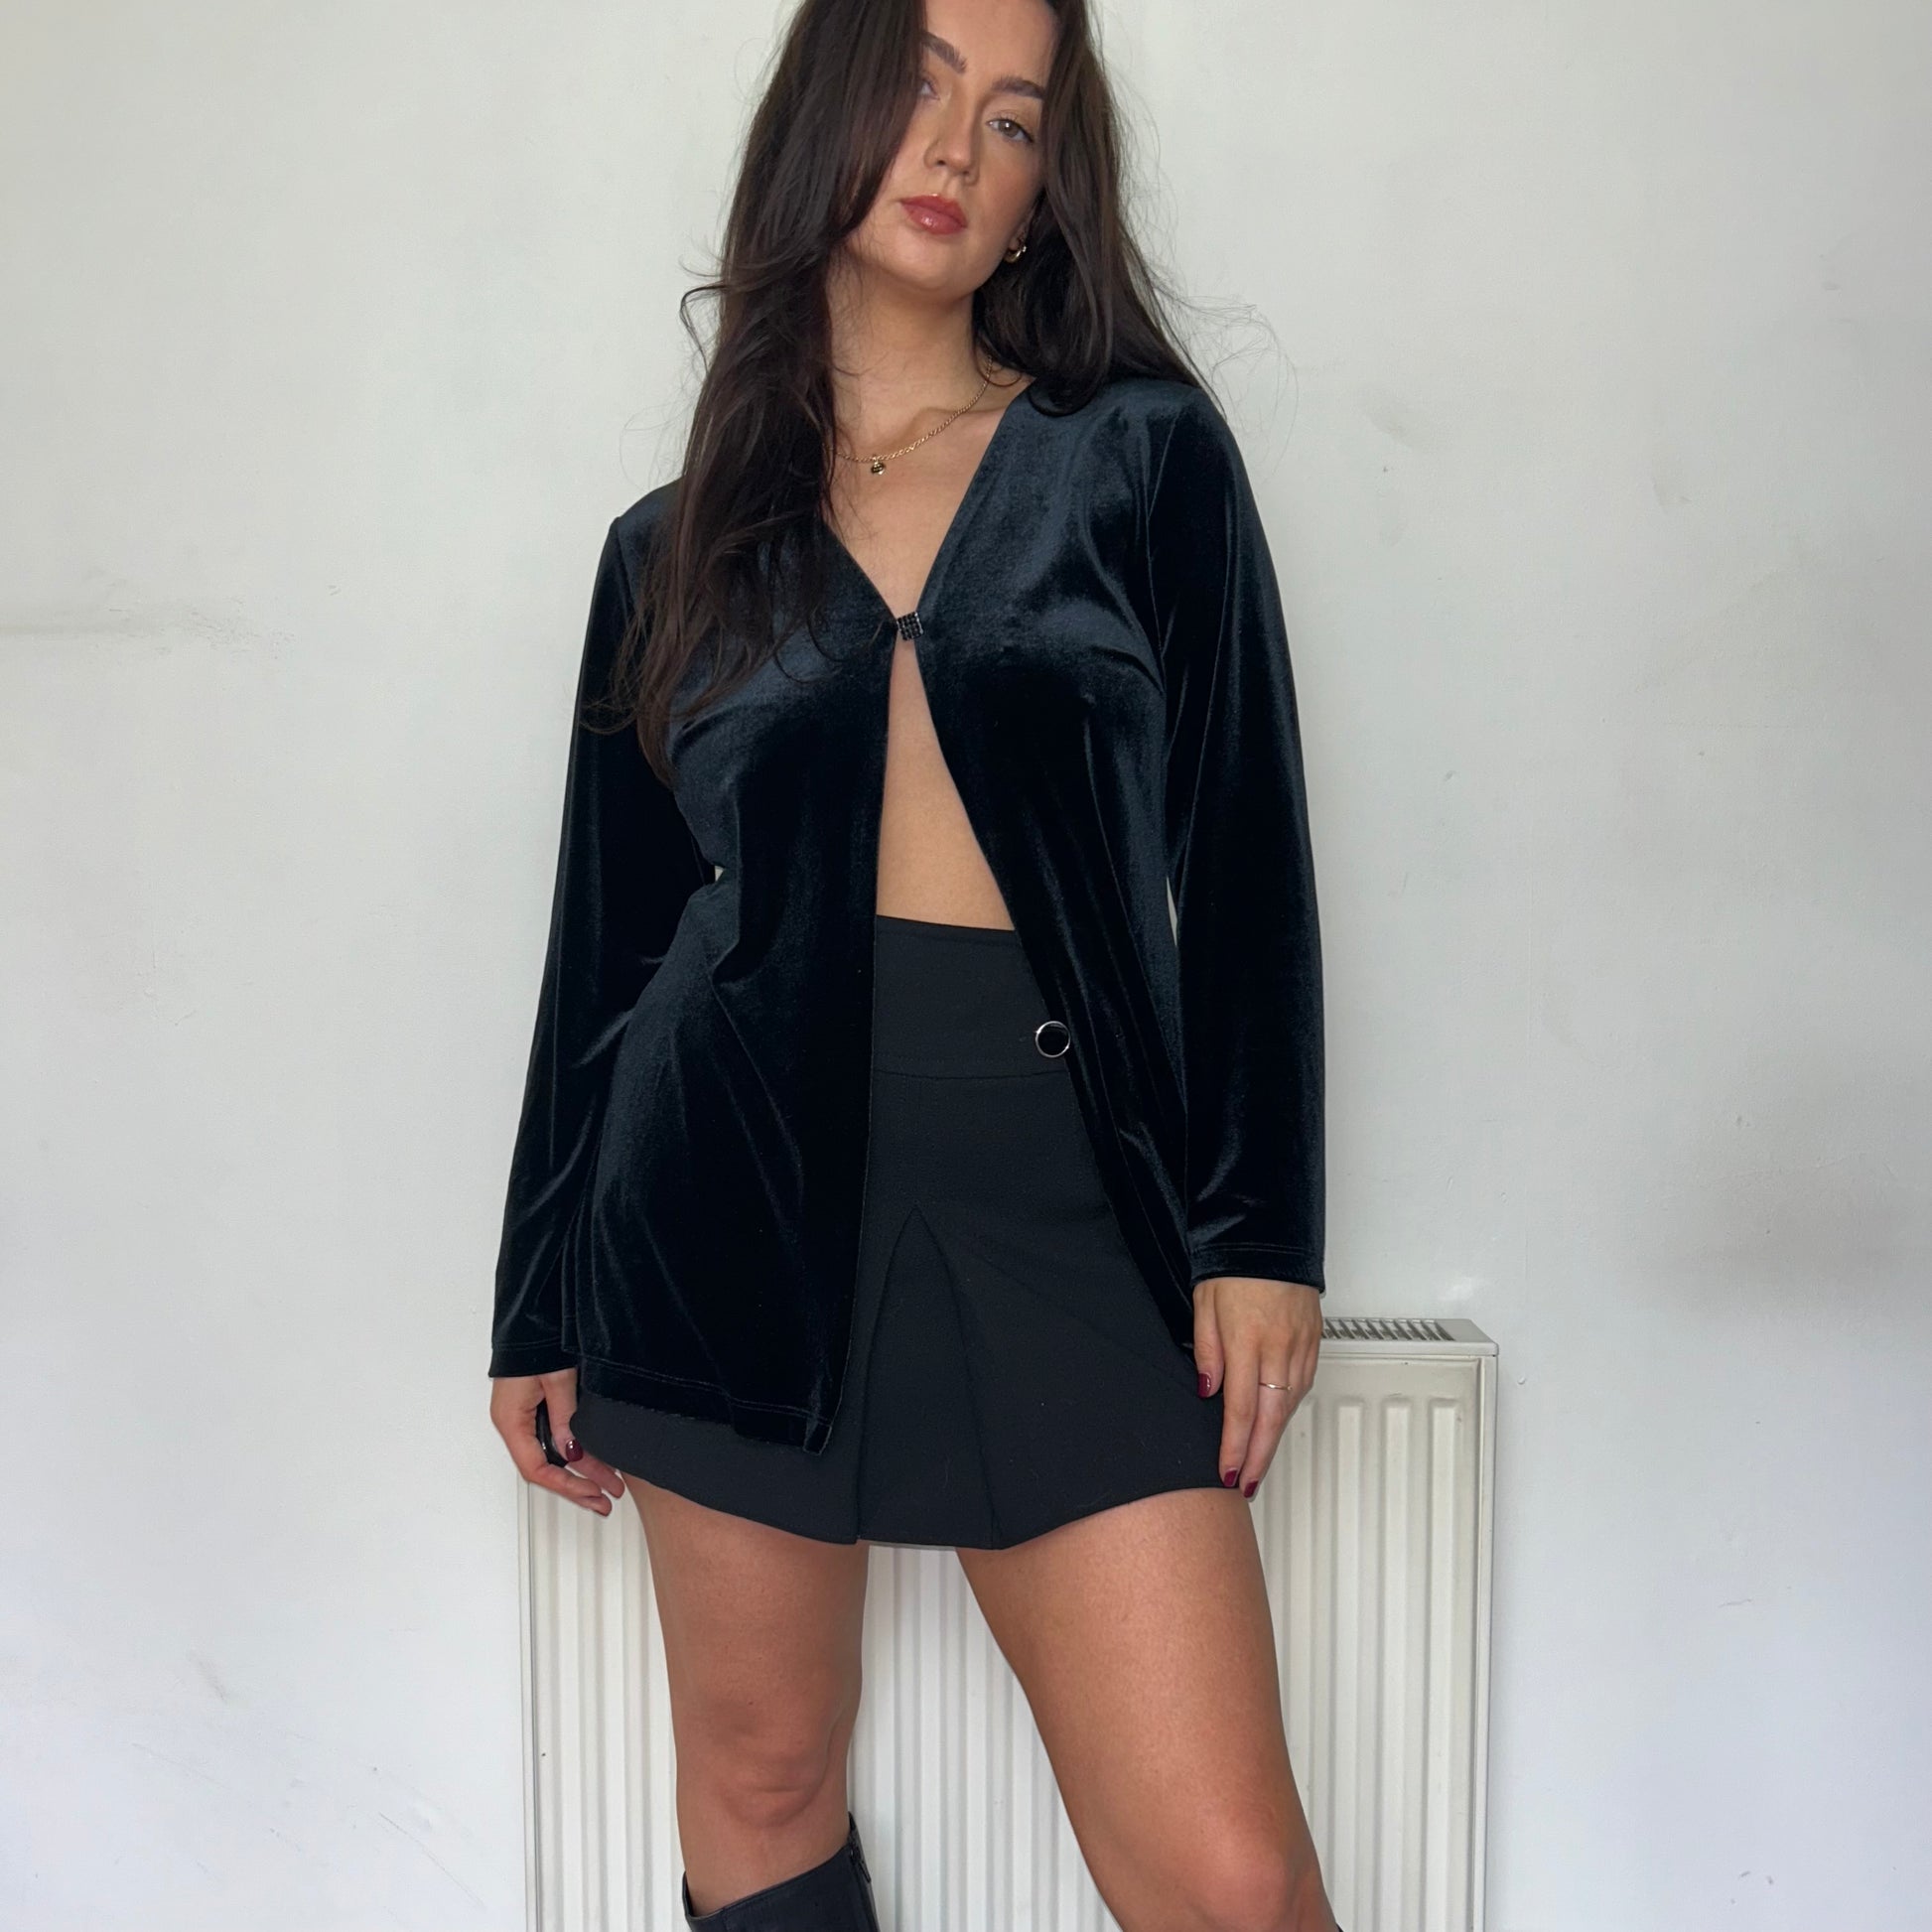 black long sleeve velvet top shown on a model wearing a black skirts and black boots